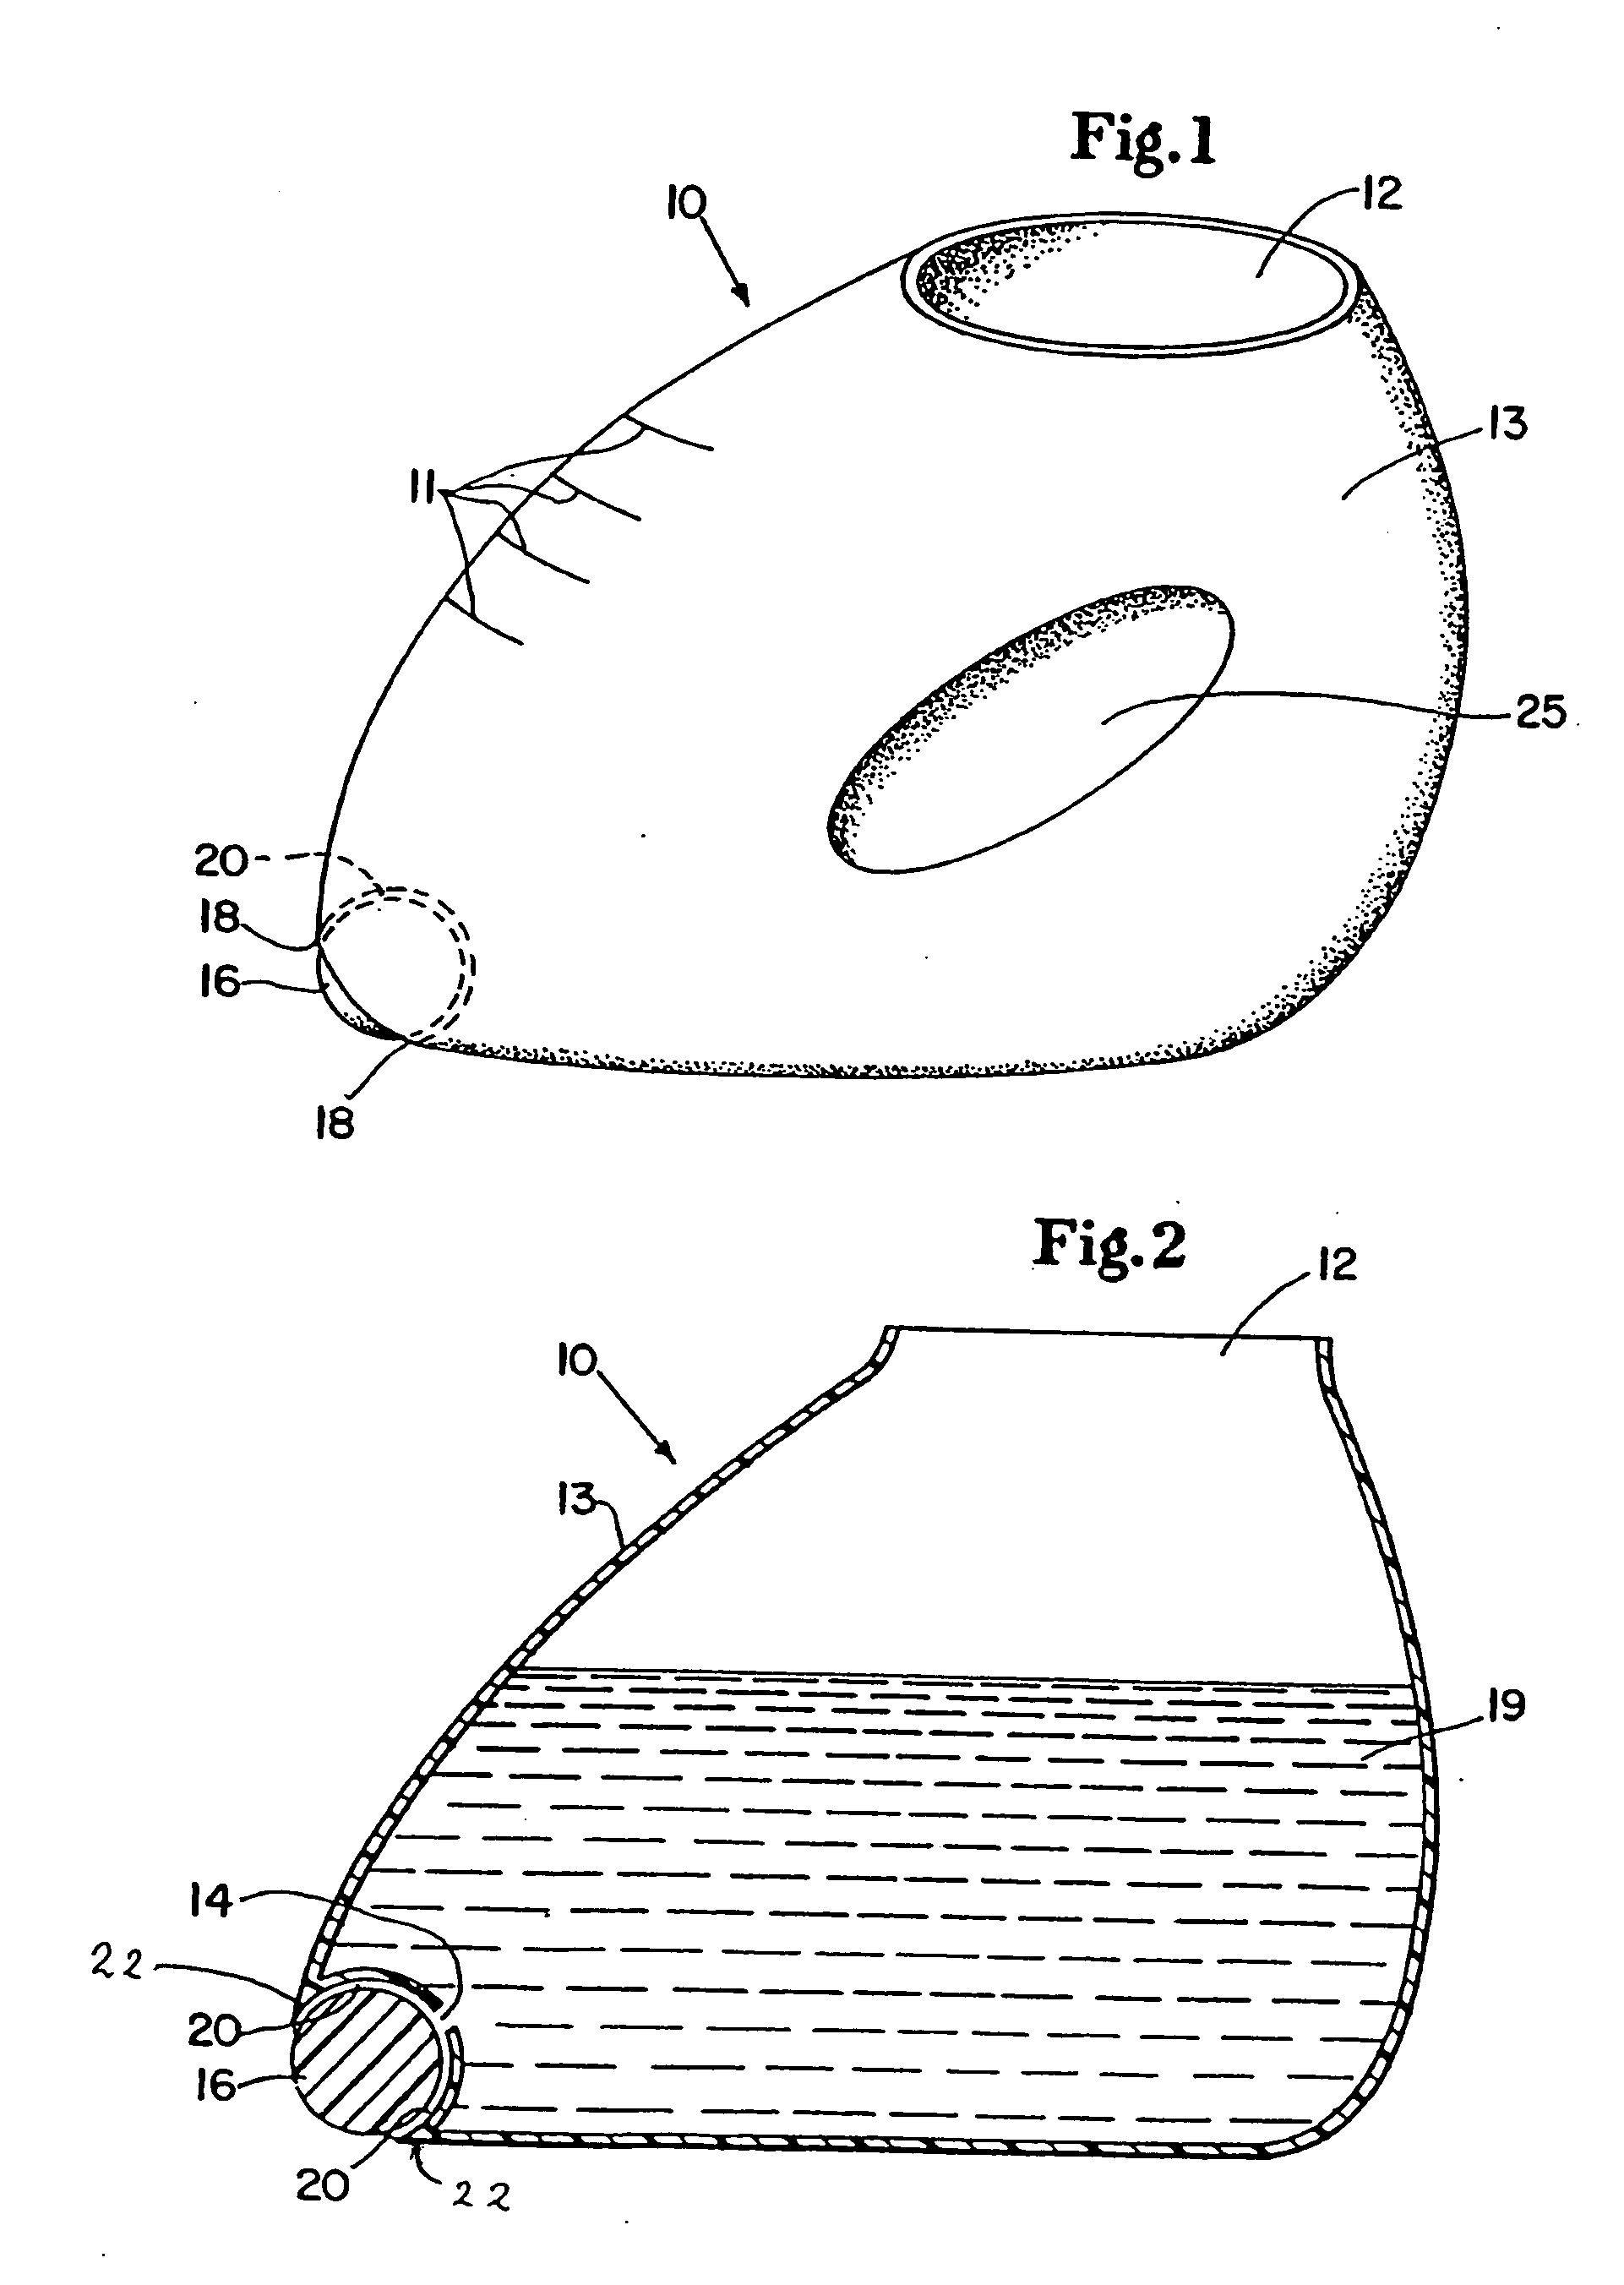 Pretreating and dispensing system